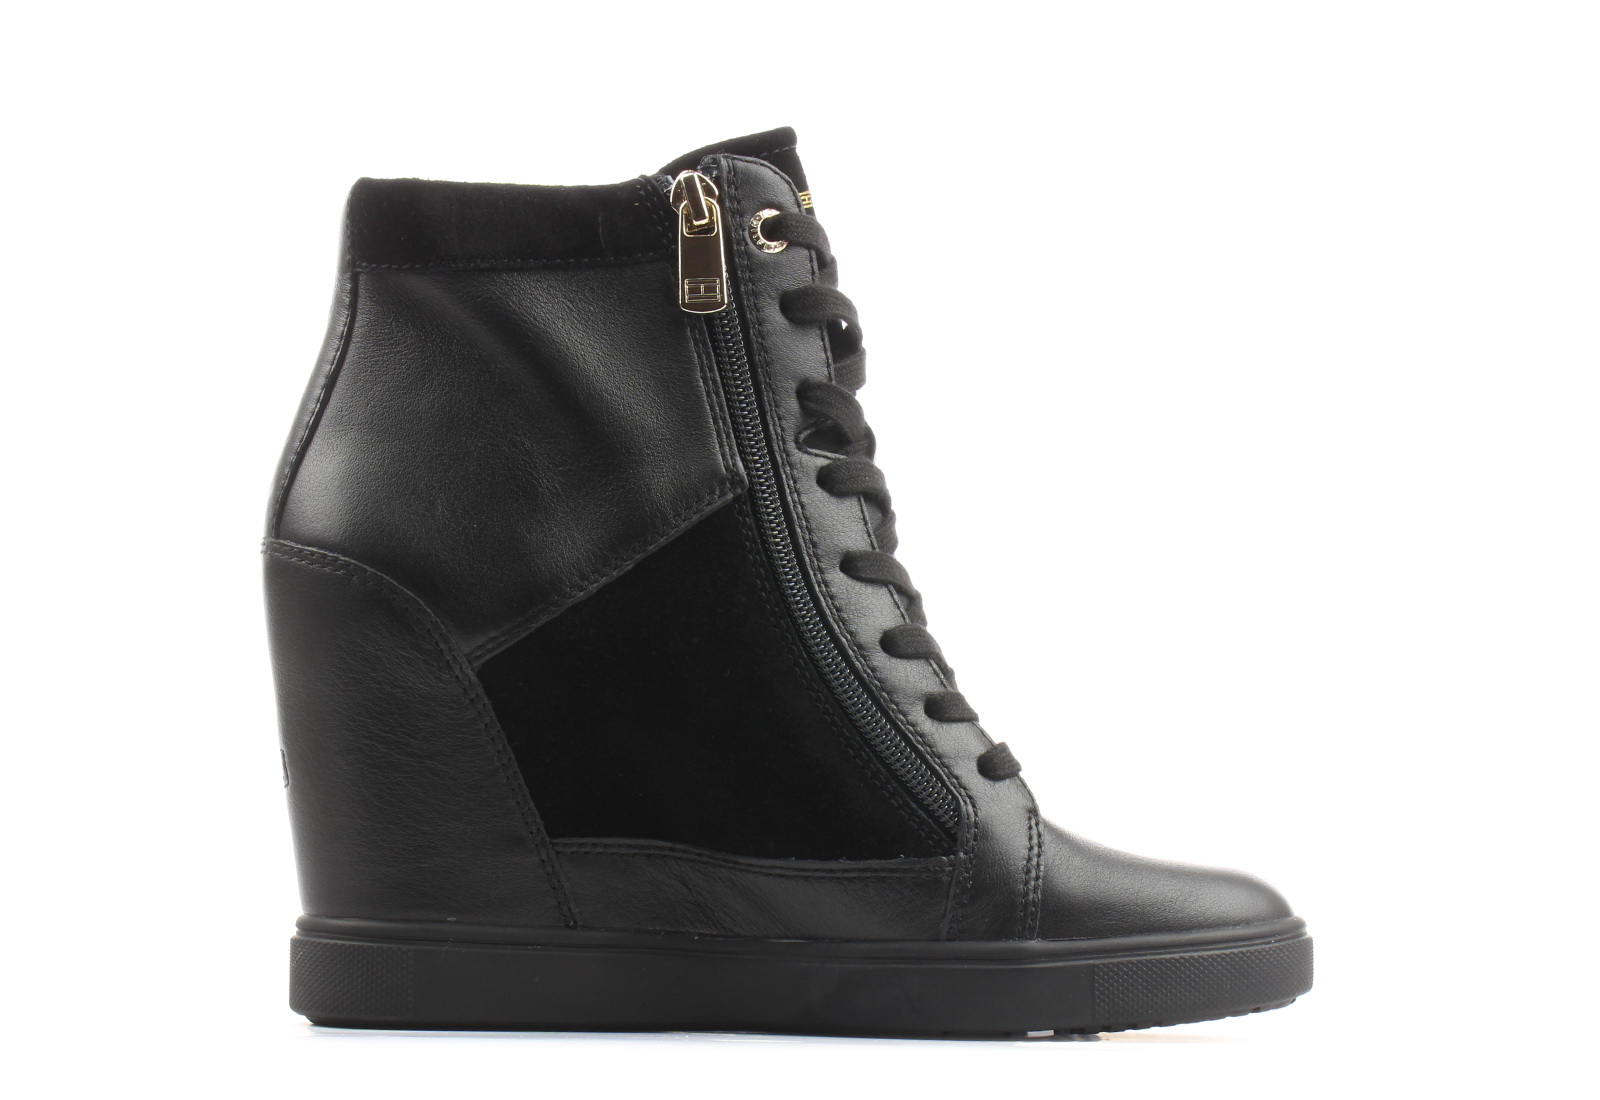 Tommy Hilfiger High shoes - Amanda Wedge 7a - - Online shop for sneakers, shoes and boots